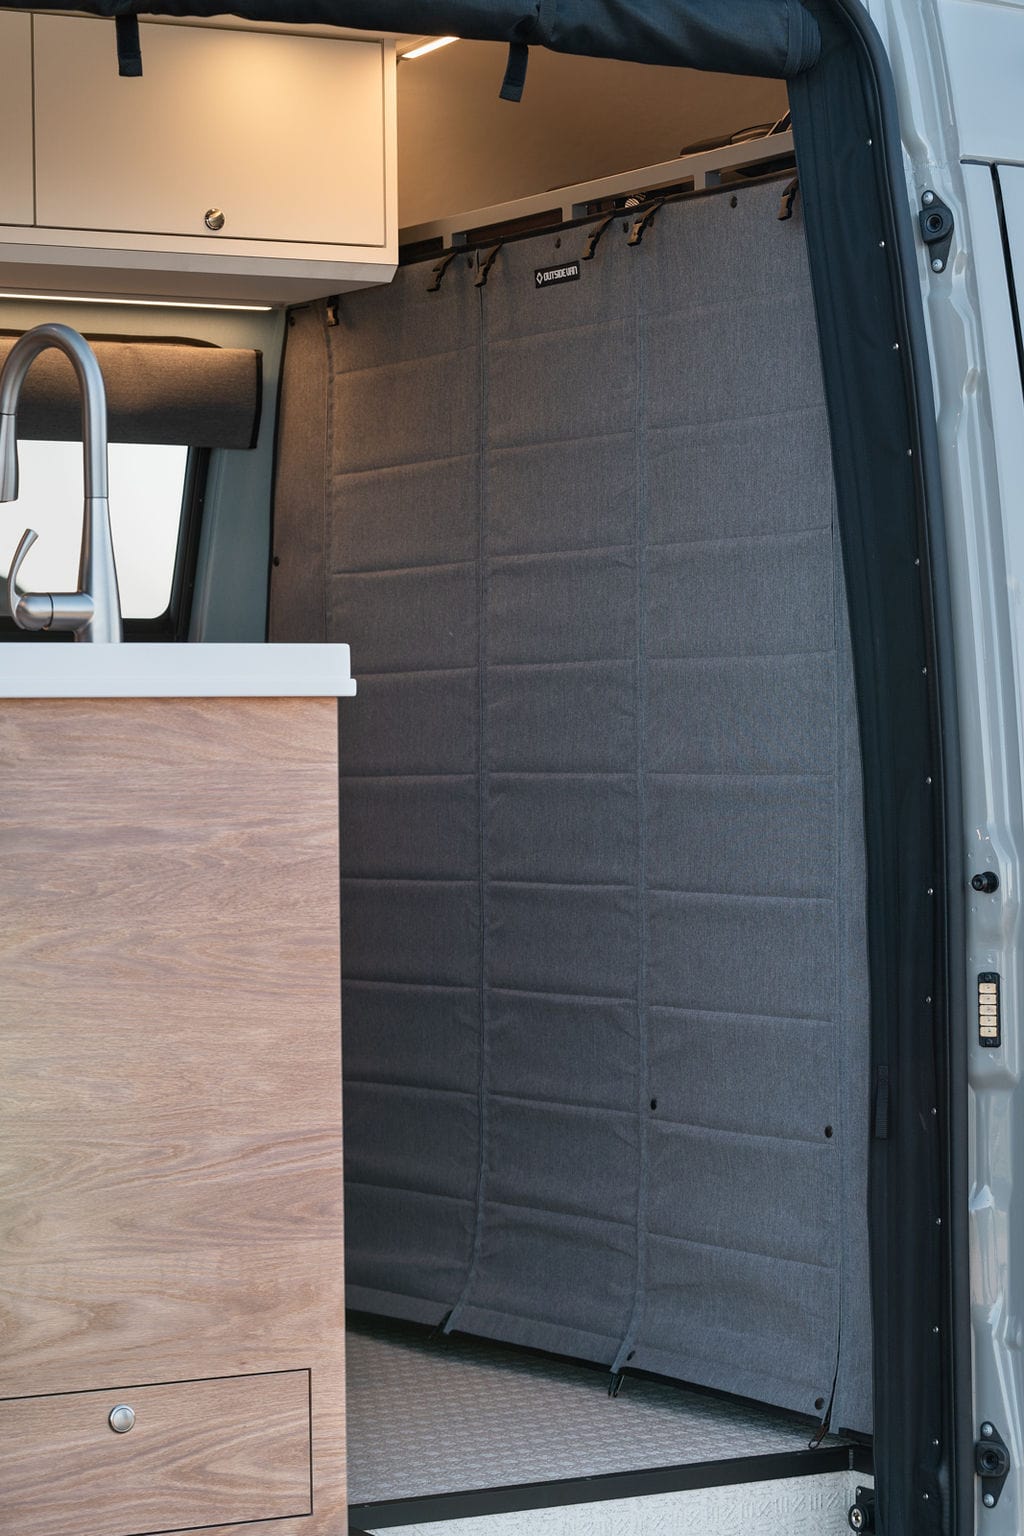 Outside Van soft wall that separates the cab from the living area in a Sprinter camper van